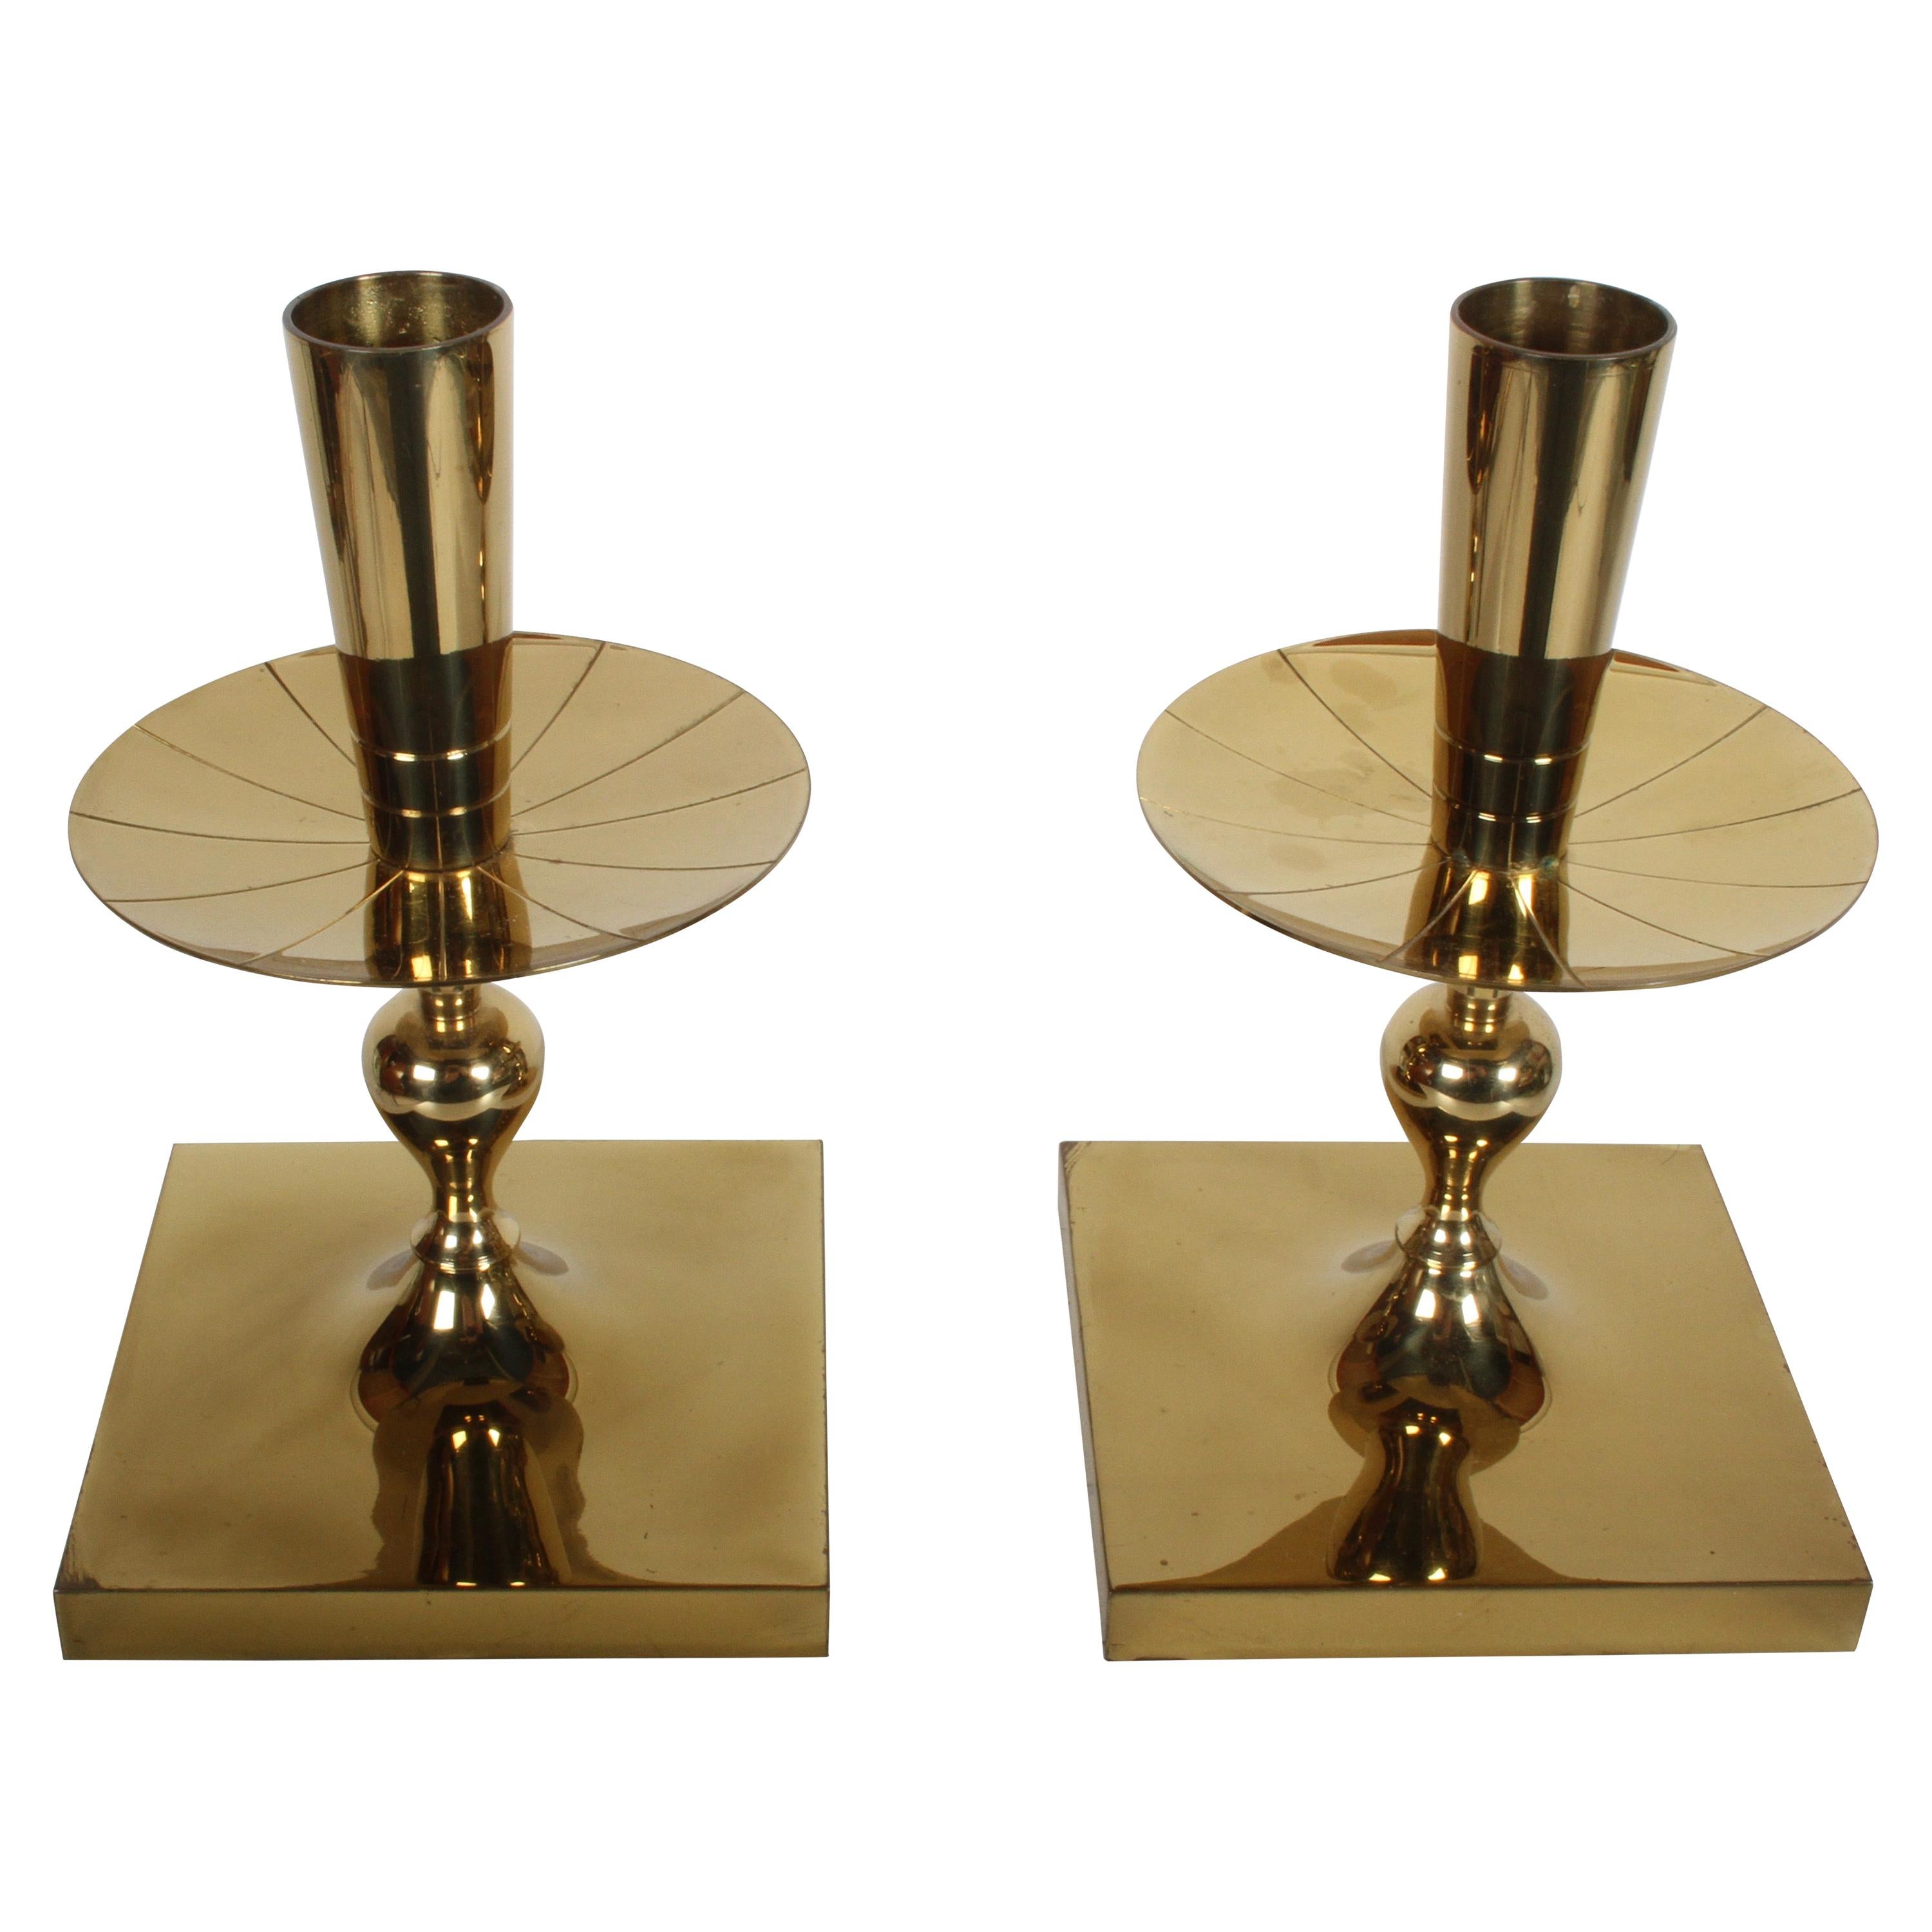 Pair of Tommi Parzinger Brass Candleholders Made by Dorlyn-Silversmiths